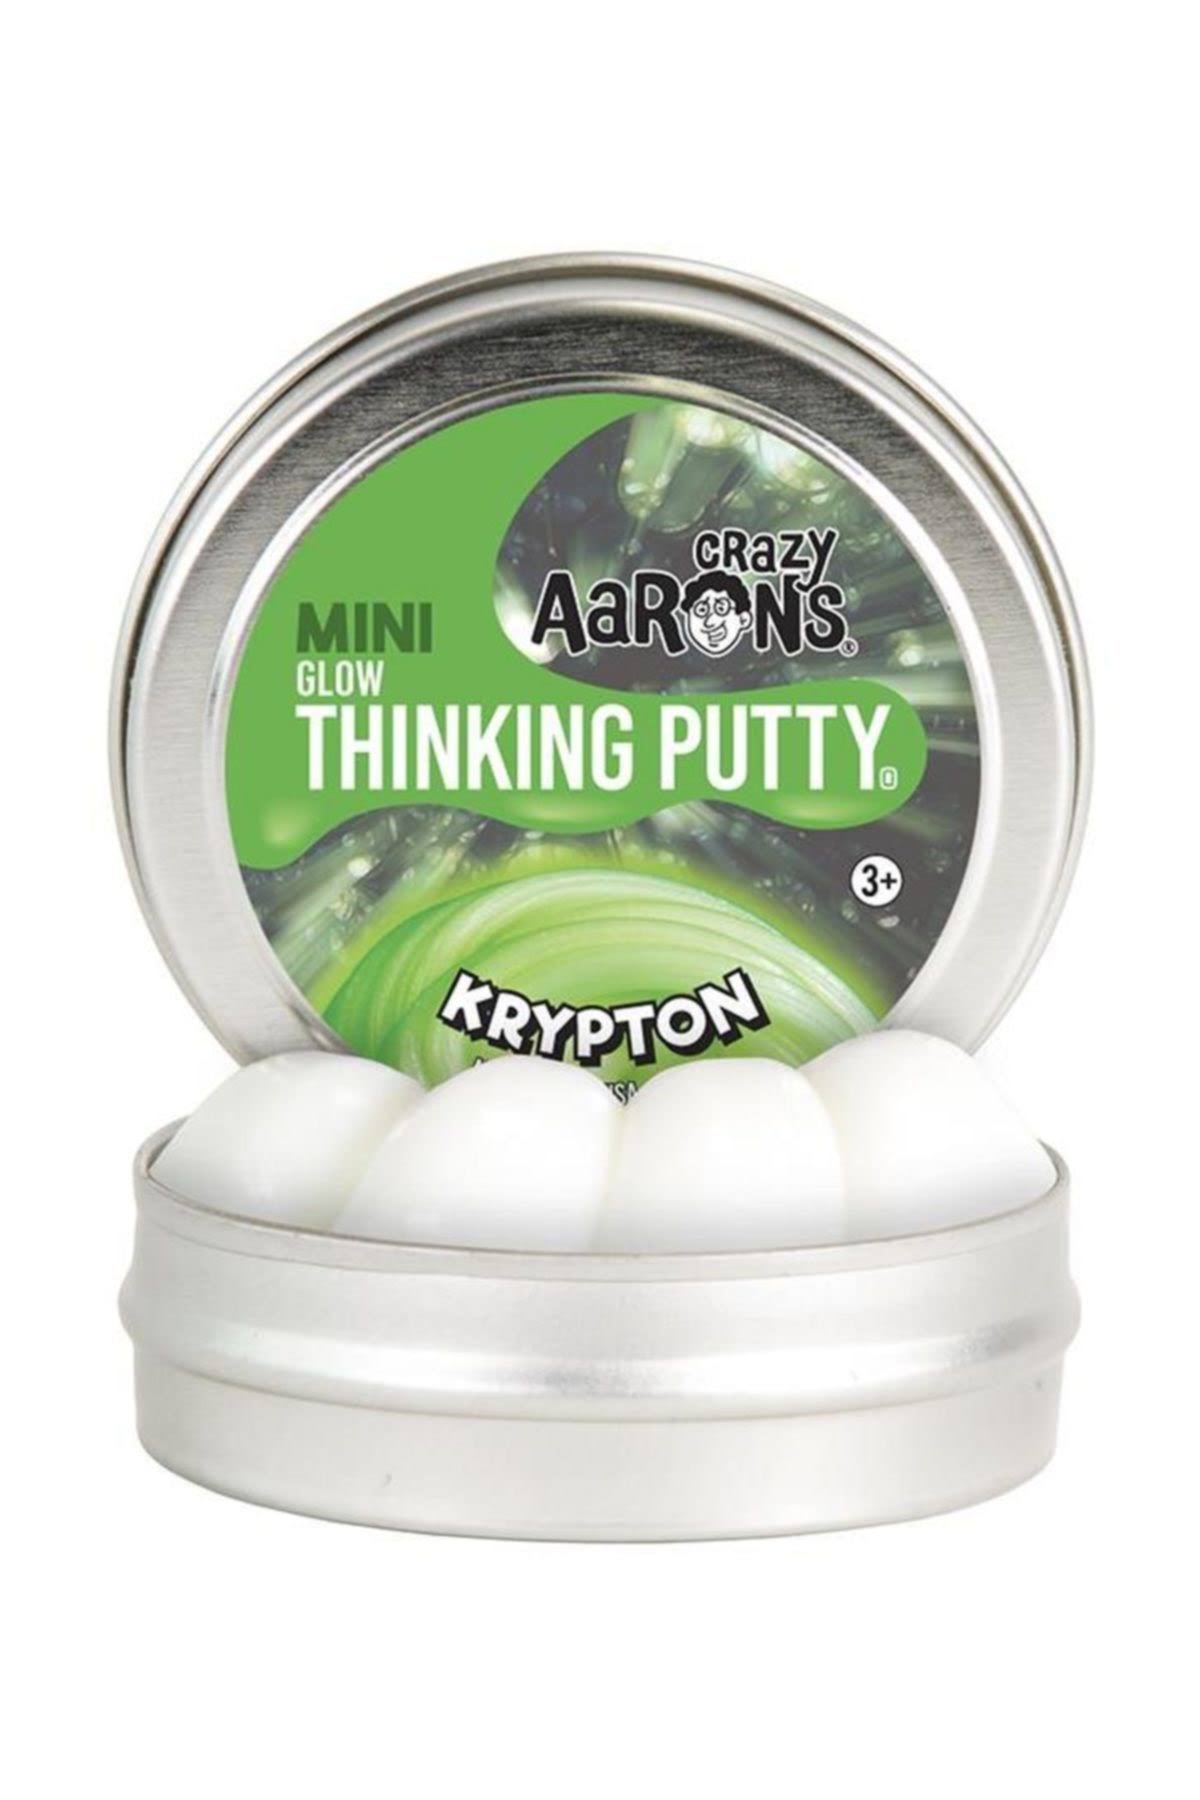 Crazy Aarons Thinking Putty - Glow - Krypton